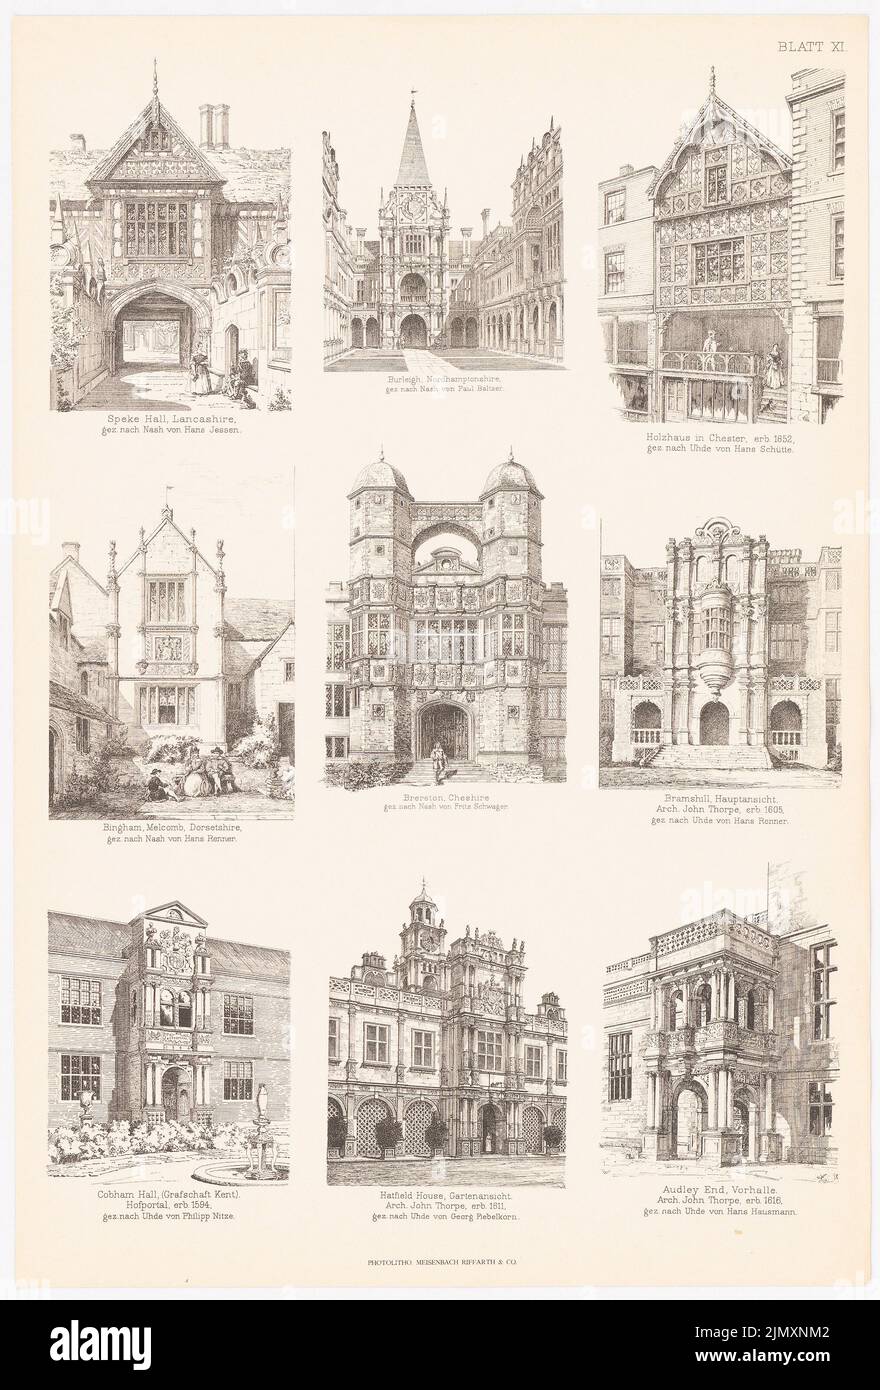 N.N., houses in Lancashire, Burleigh, Chester, Bingham, Brereton, Bramshill, Audley End. (From: Baukunst d. Renaissance in England, ed. V. Character Excess D (1875-1875): Spece Hall in Lancashire. Halle in Burleigh, Northhamptonshire. Holzhaus in Chester. Cobham Hall in Kent. Hatfield House. Audley End .. Print on paper, 53.2 x 36 cm (including scan edges) Stock Photo